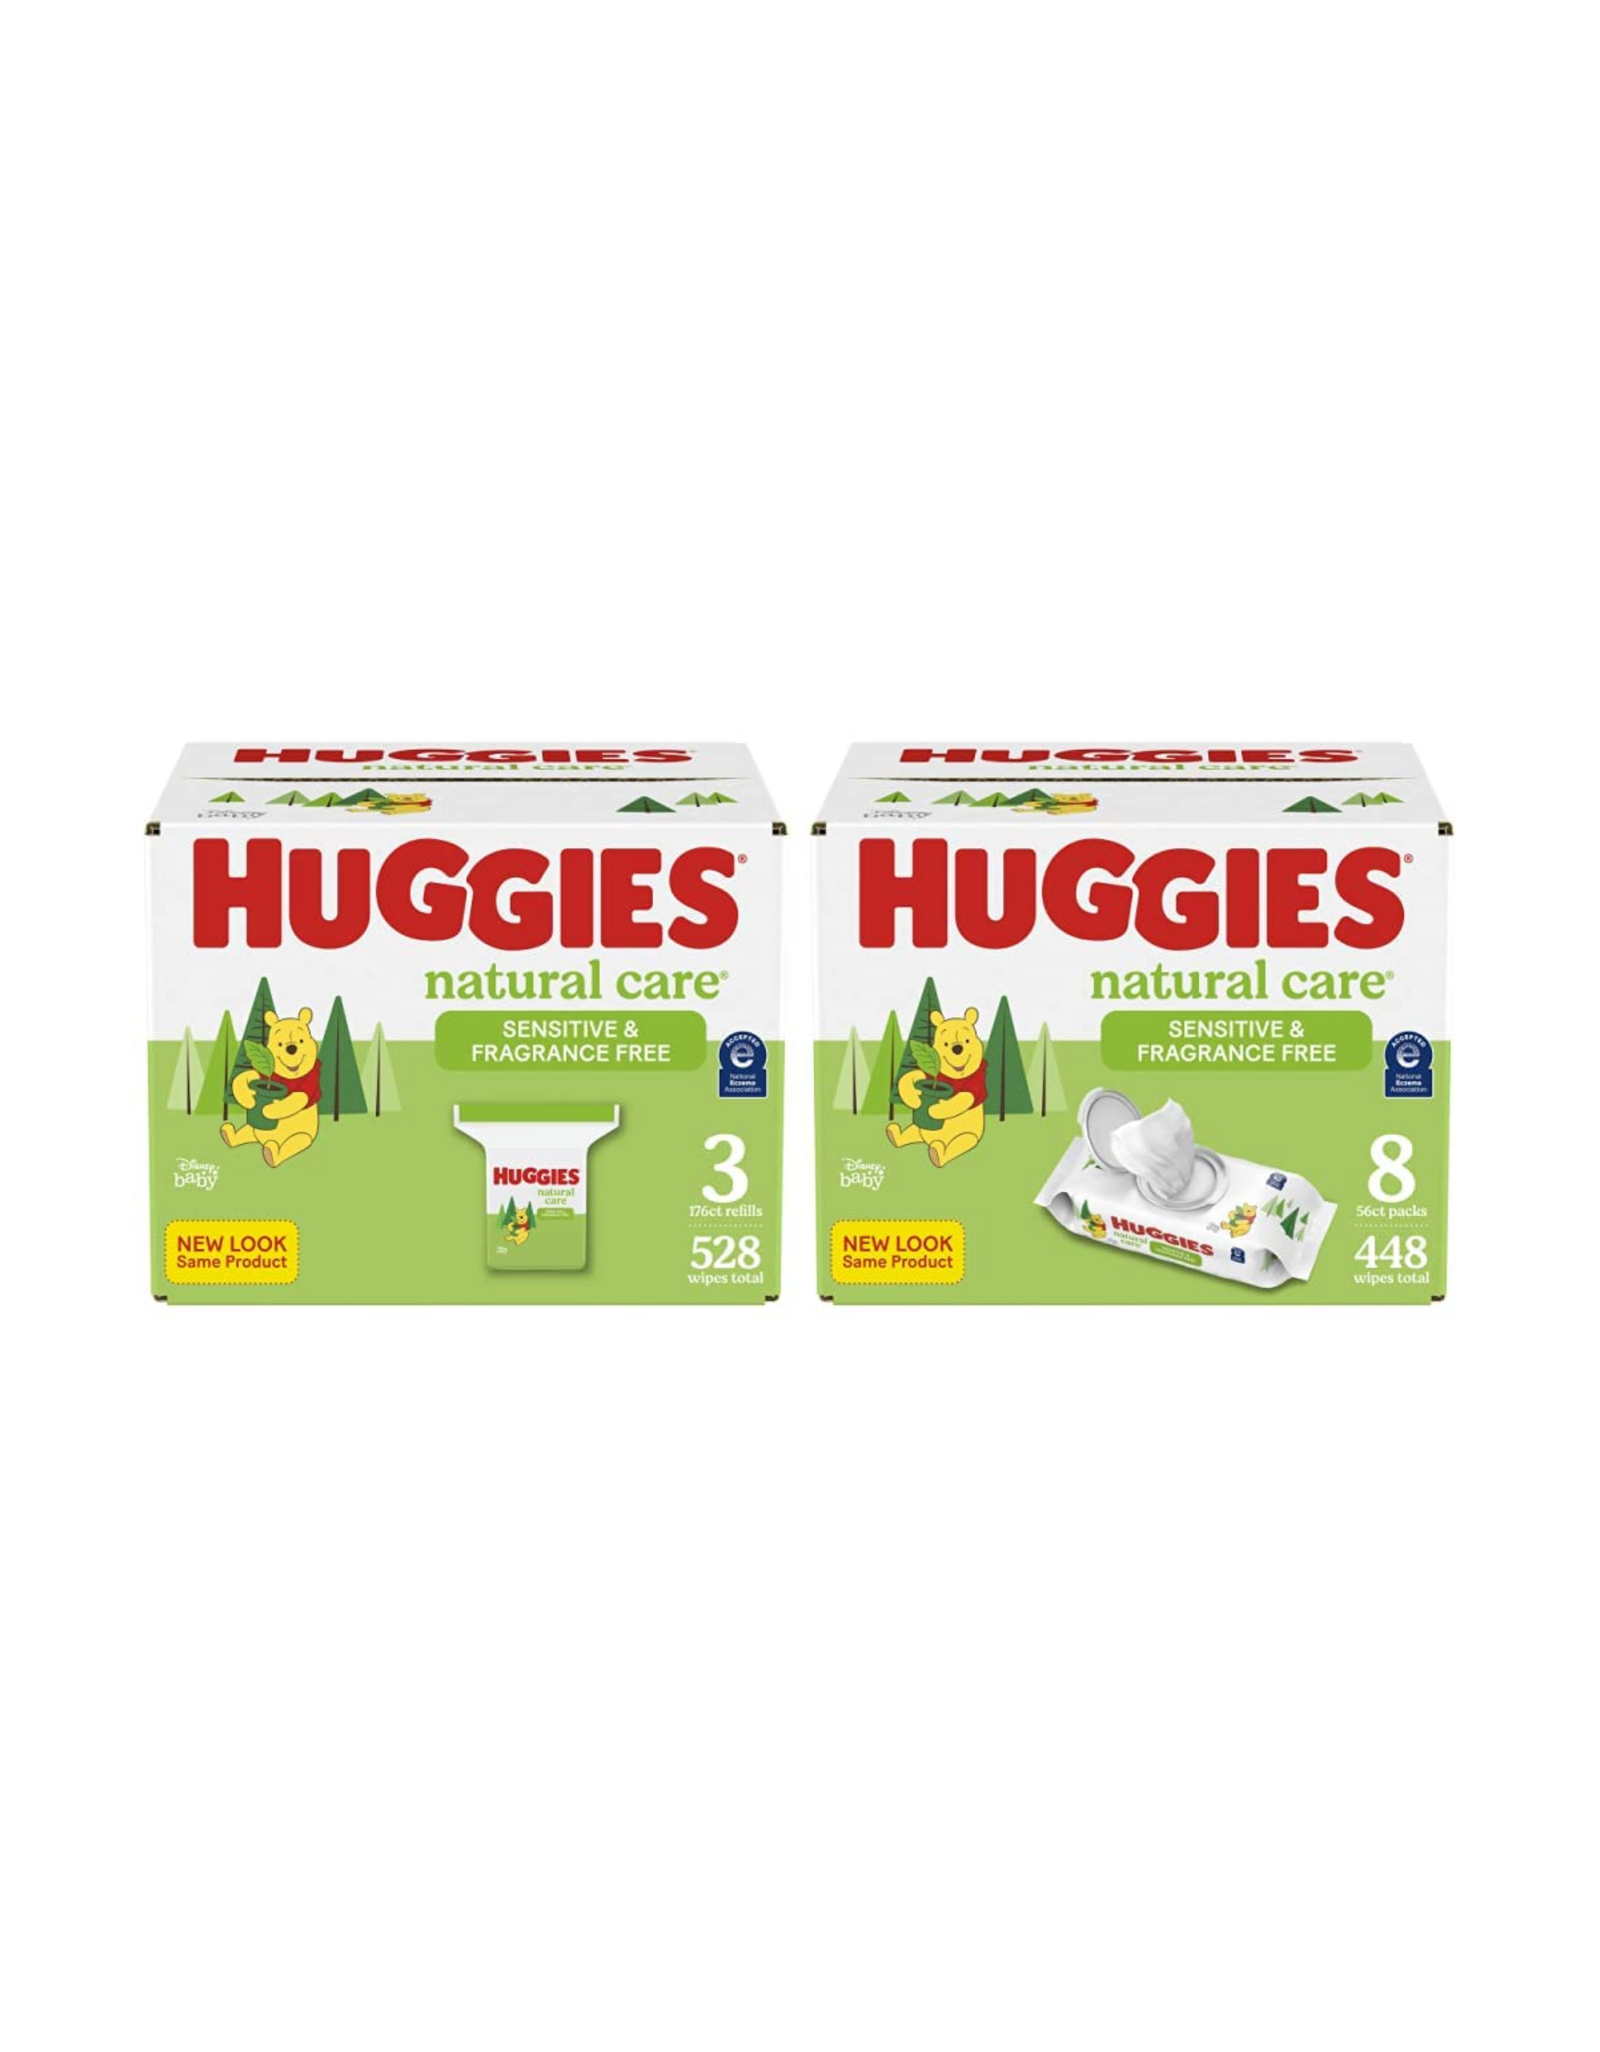 Baby Wipes Bundle: Huggies Natural Care & Fragrance Free Unscented, 448 Wipes Total (8 Packs) and 528 Wipes Total (3 Refill Packs)